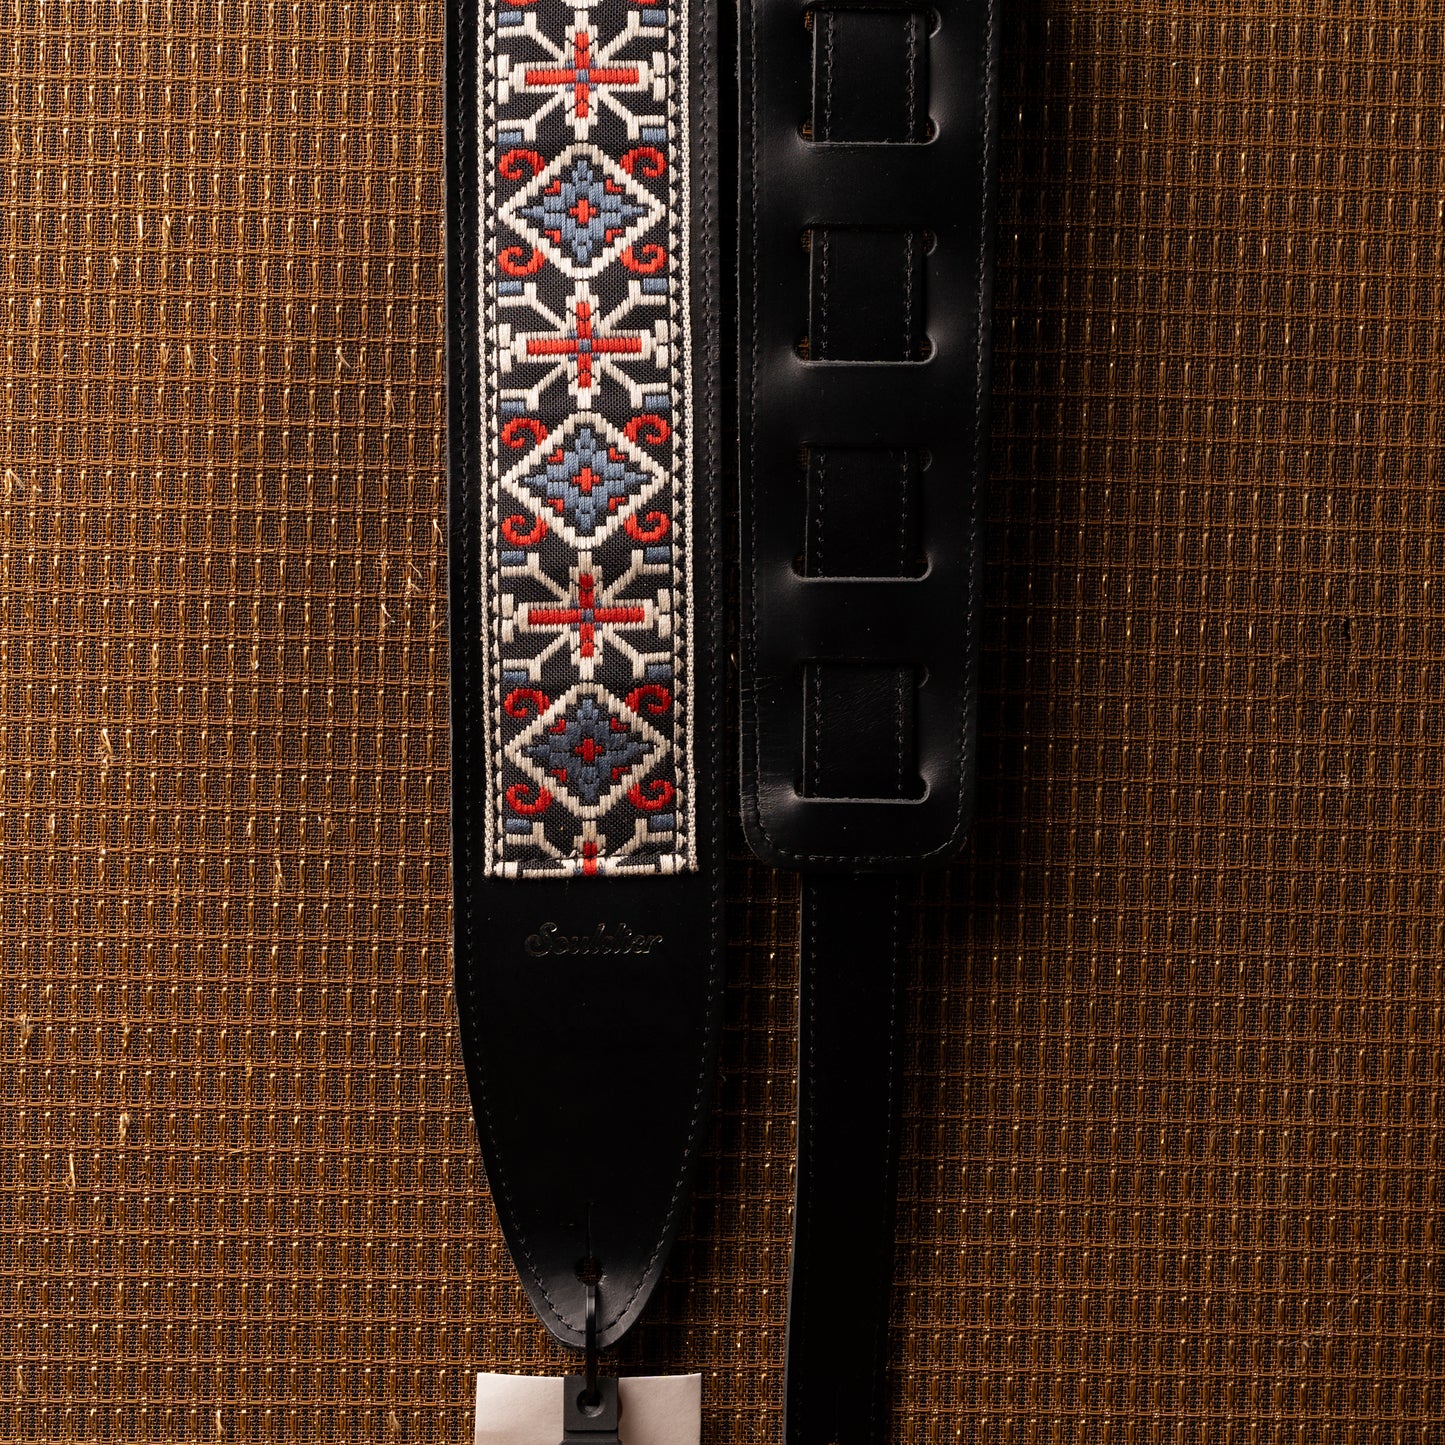 Souldier San Quentin Red Blue Torpedo Black Leather Guitar Strap